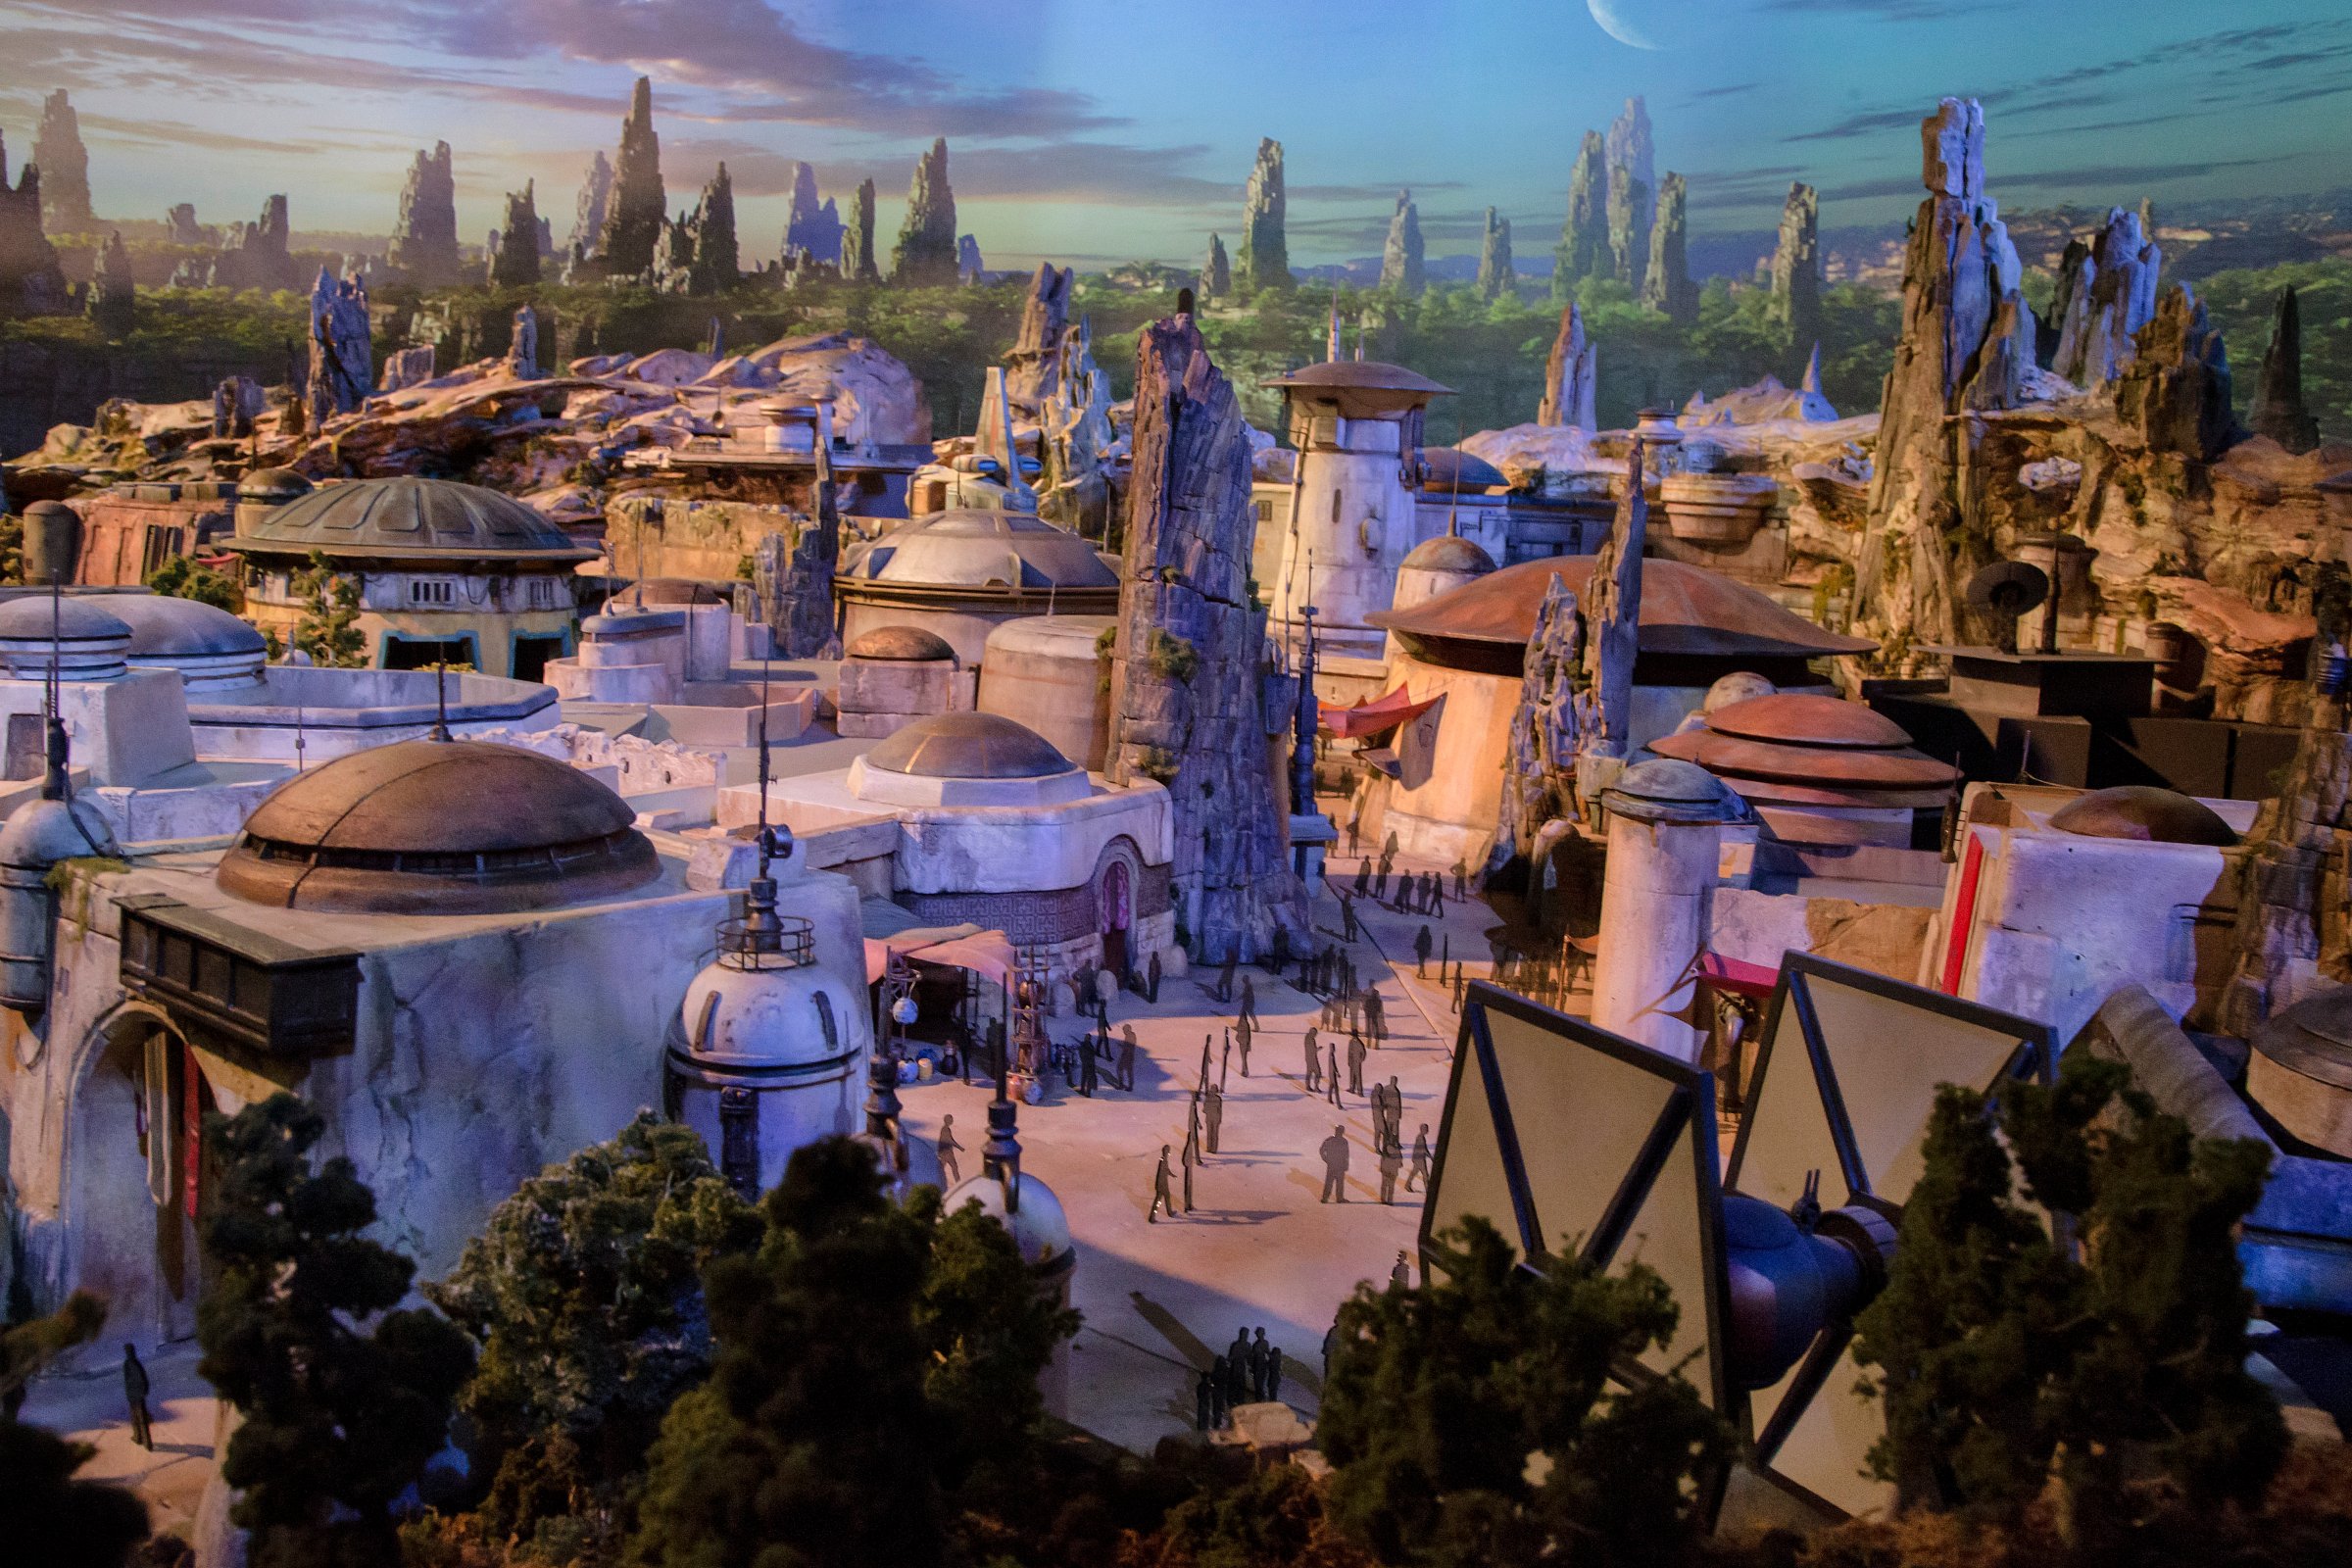 The fully detailed model of the Star Wars-themed park, under development at Disneyland in Anaheim, Calif., remains on display in Walt Disney Parks and Resorts 'A Galaxy of Stories' pavilion throughout D23 Expo at the Anaheim Convention Center. The exhibition gives D23 Expo guests an up-close look at what's to come on this never-before seen planet.